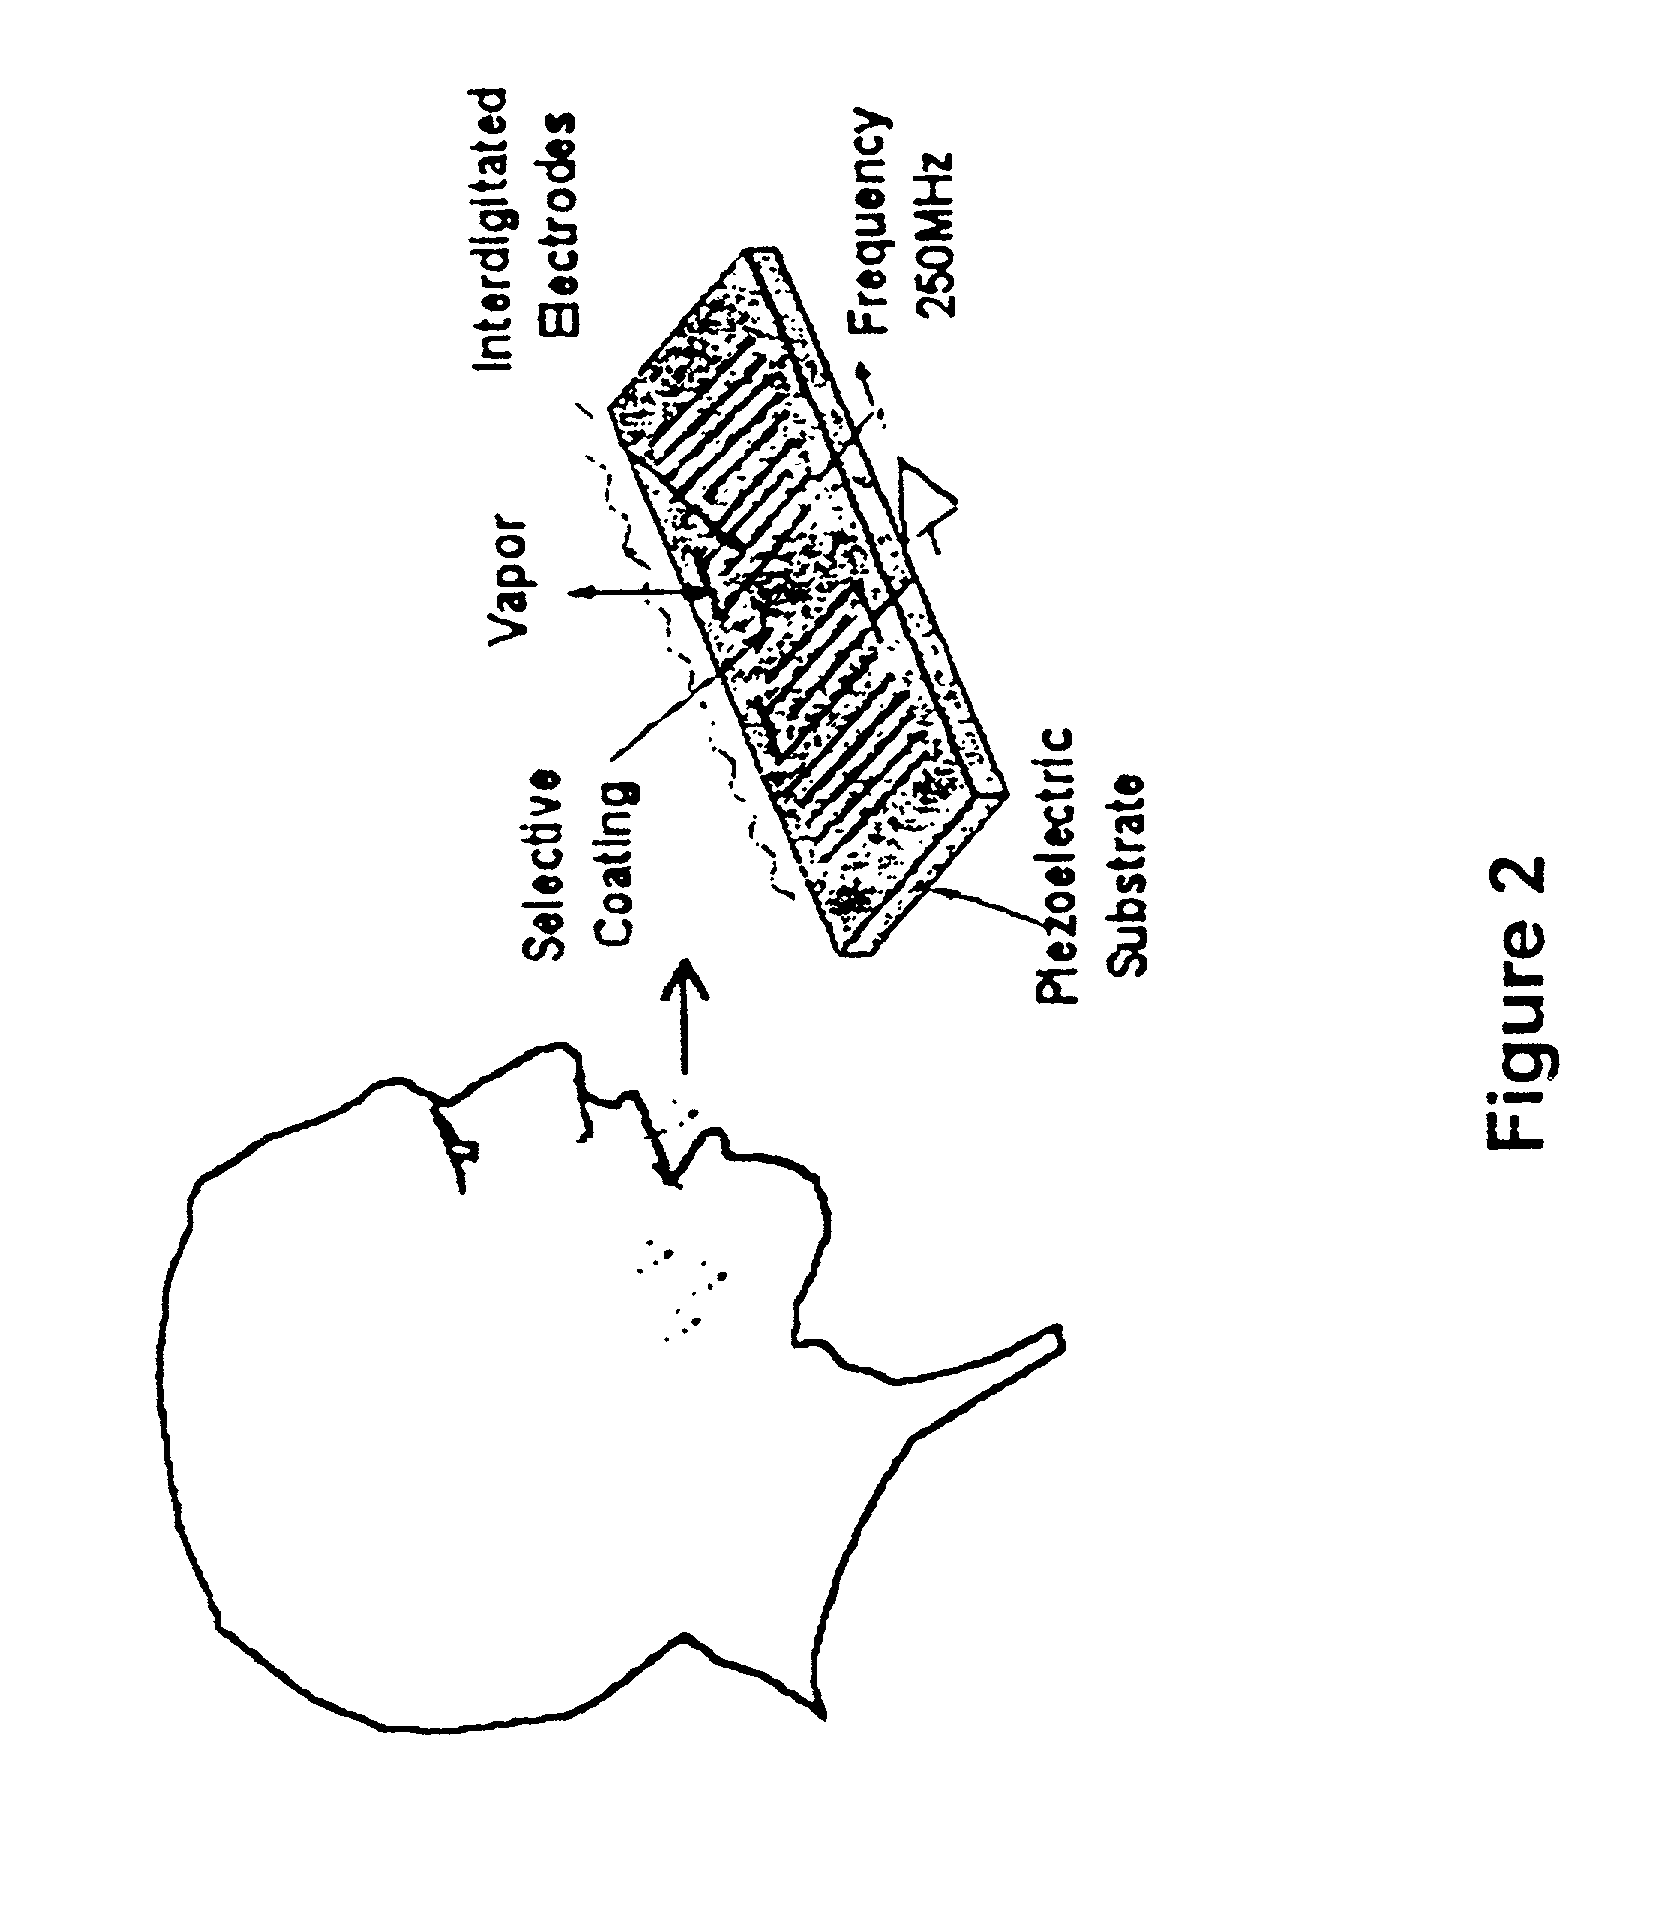 Method and apparatus for detecting illicit substances